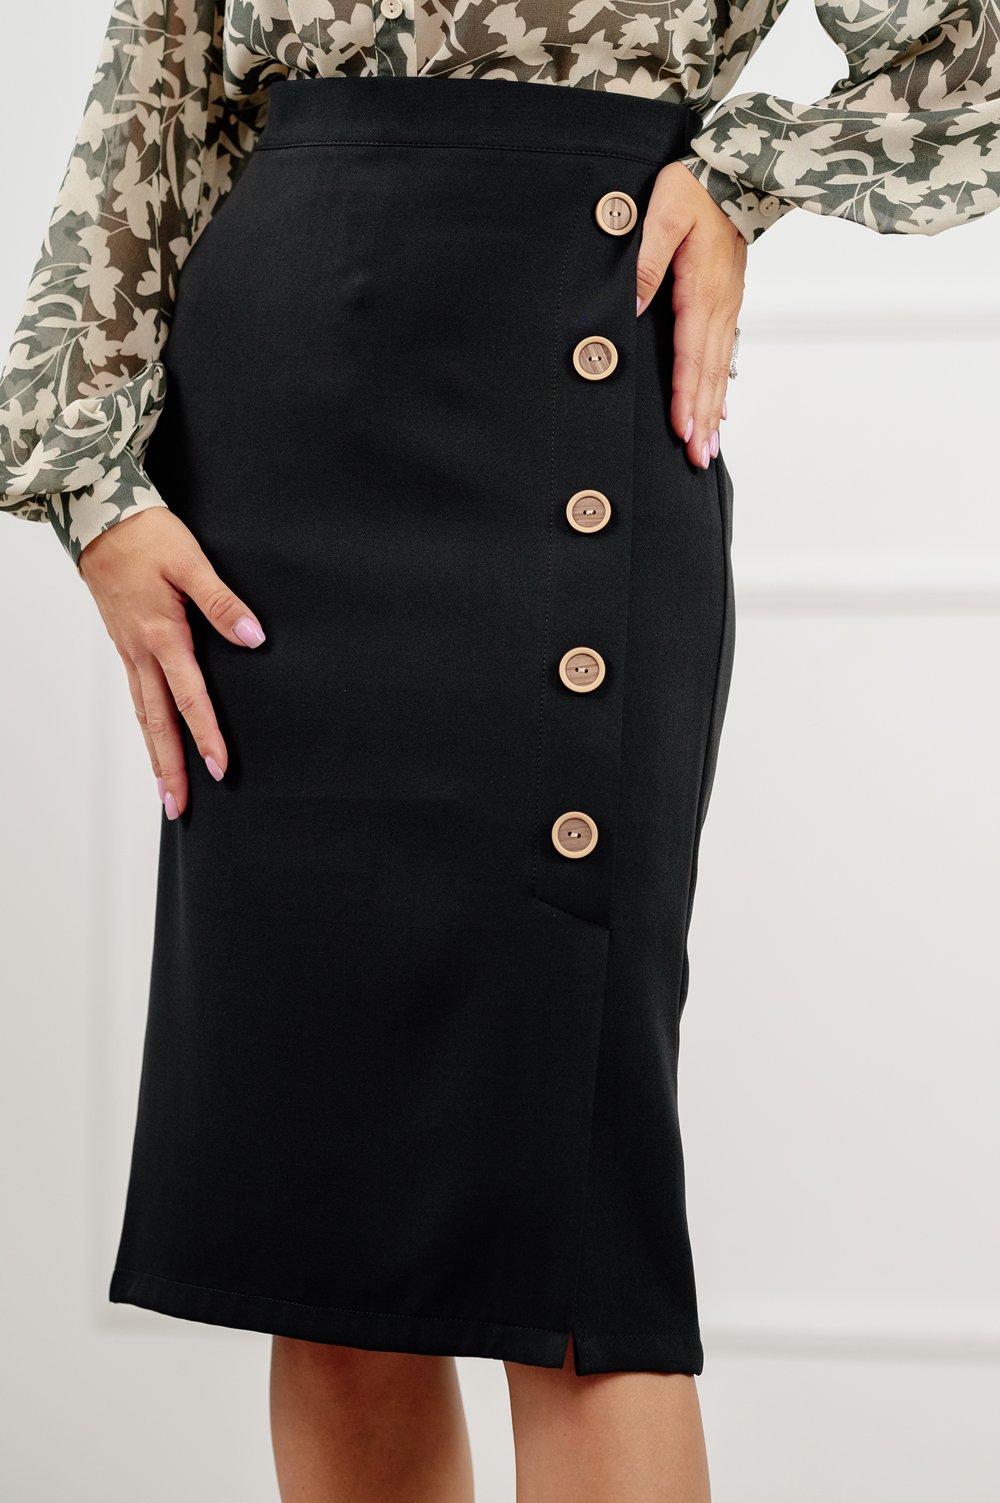 Black midi skirt with an accent button